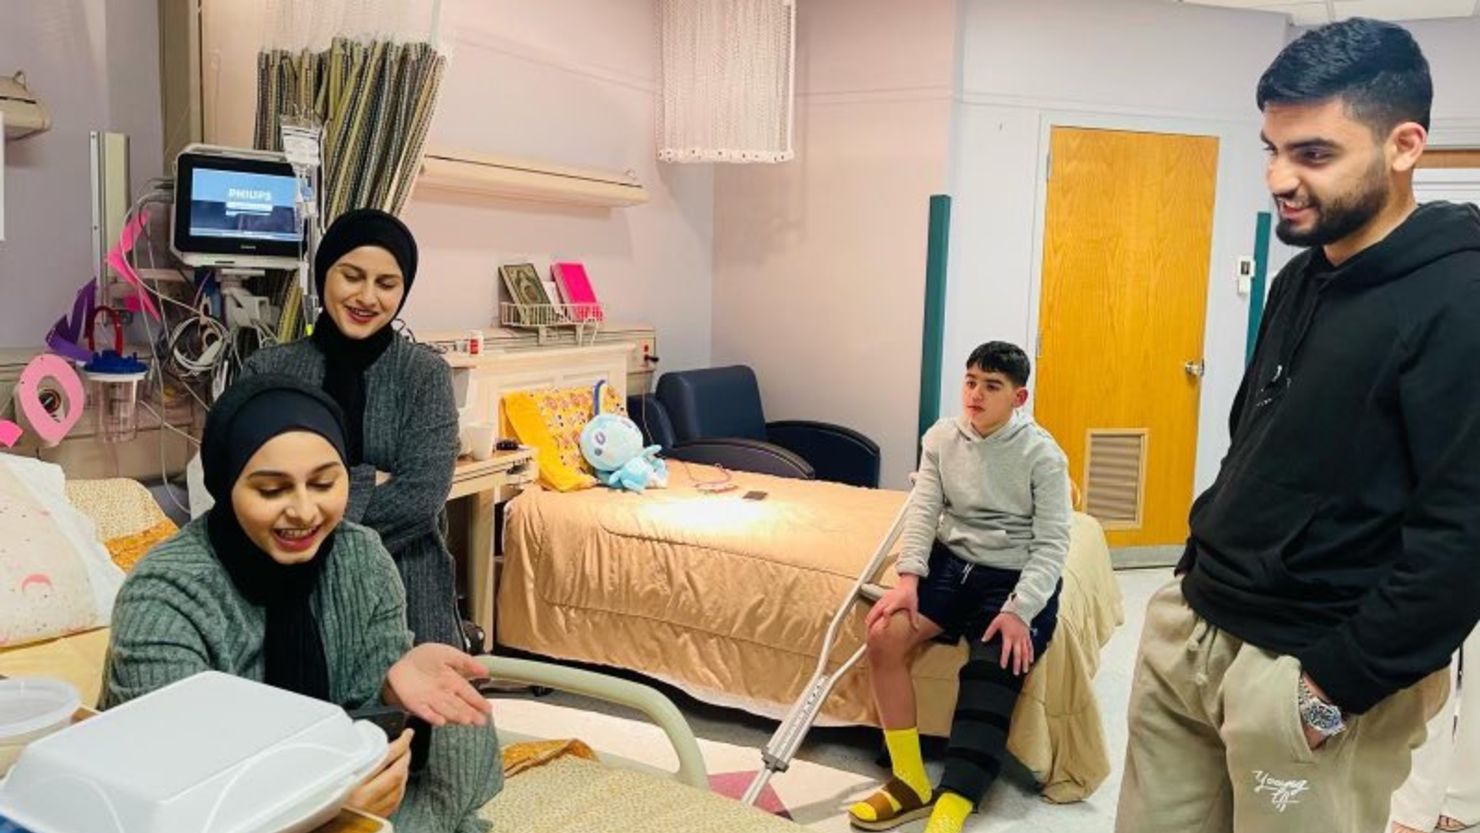 Thirteen-year-old Ayham Musalm, center, is receiving treatment for a fractured leg and glass shrapnel lodged in his knee. He was injured when debris from a strike on a neighbors’ house came straight into his home.